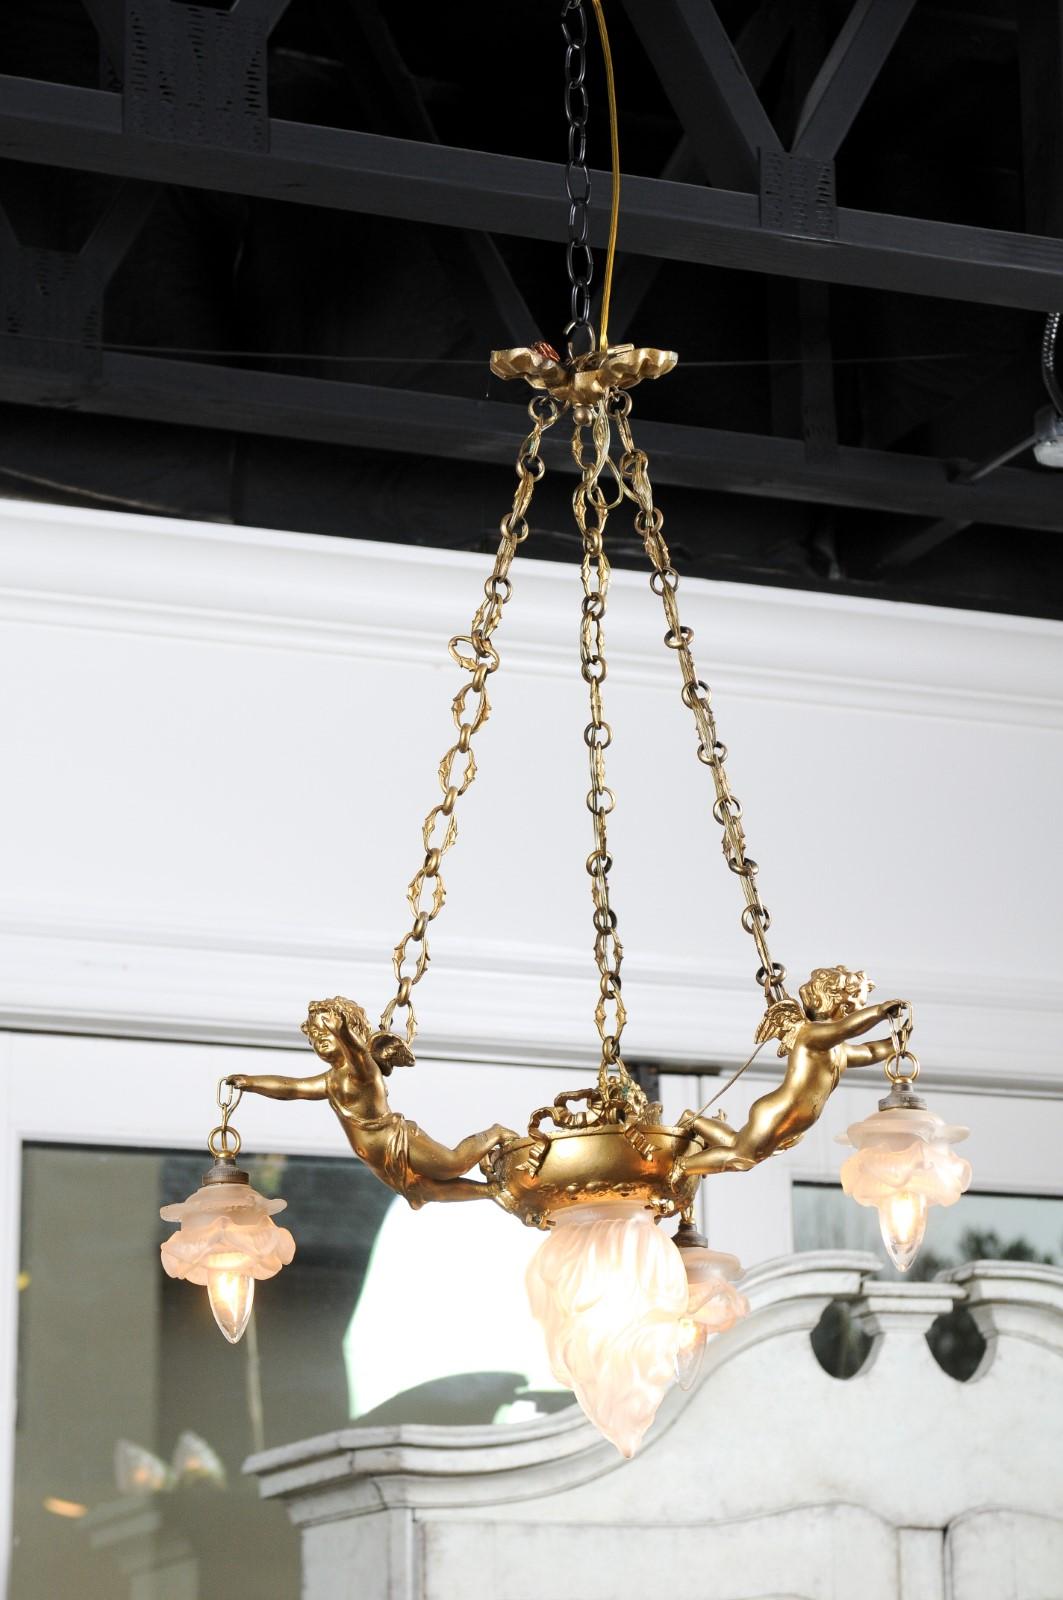 French 19th Century Gilt Metal Chandelier with Three Cherubs Holding the Lights For Sale 2